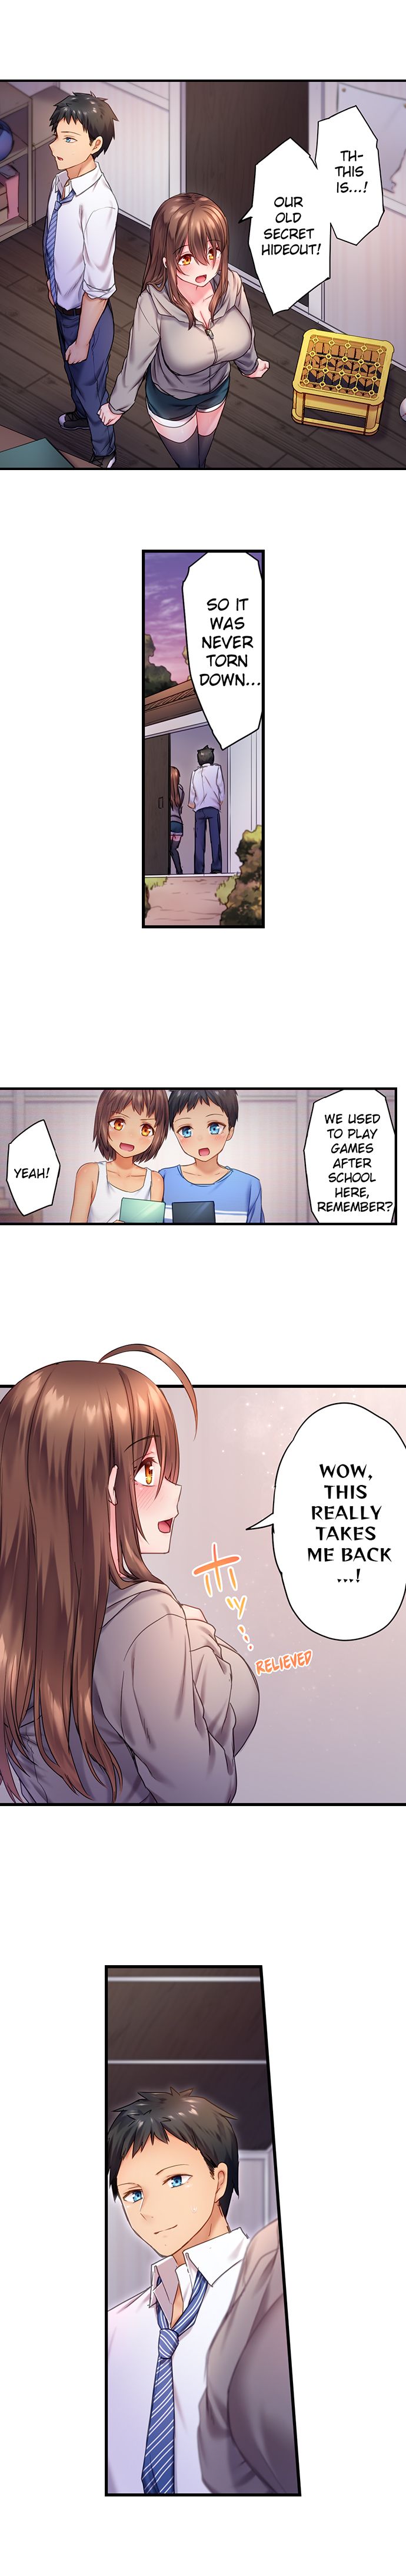 Can’t Believe My Loner Childhood Friend Became This Sexy Girl - Chapter 5 Page 4